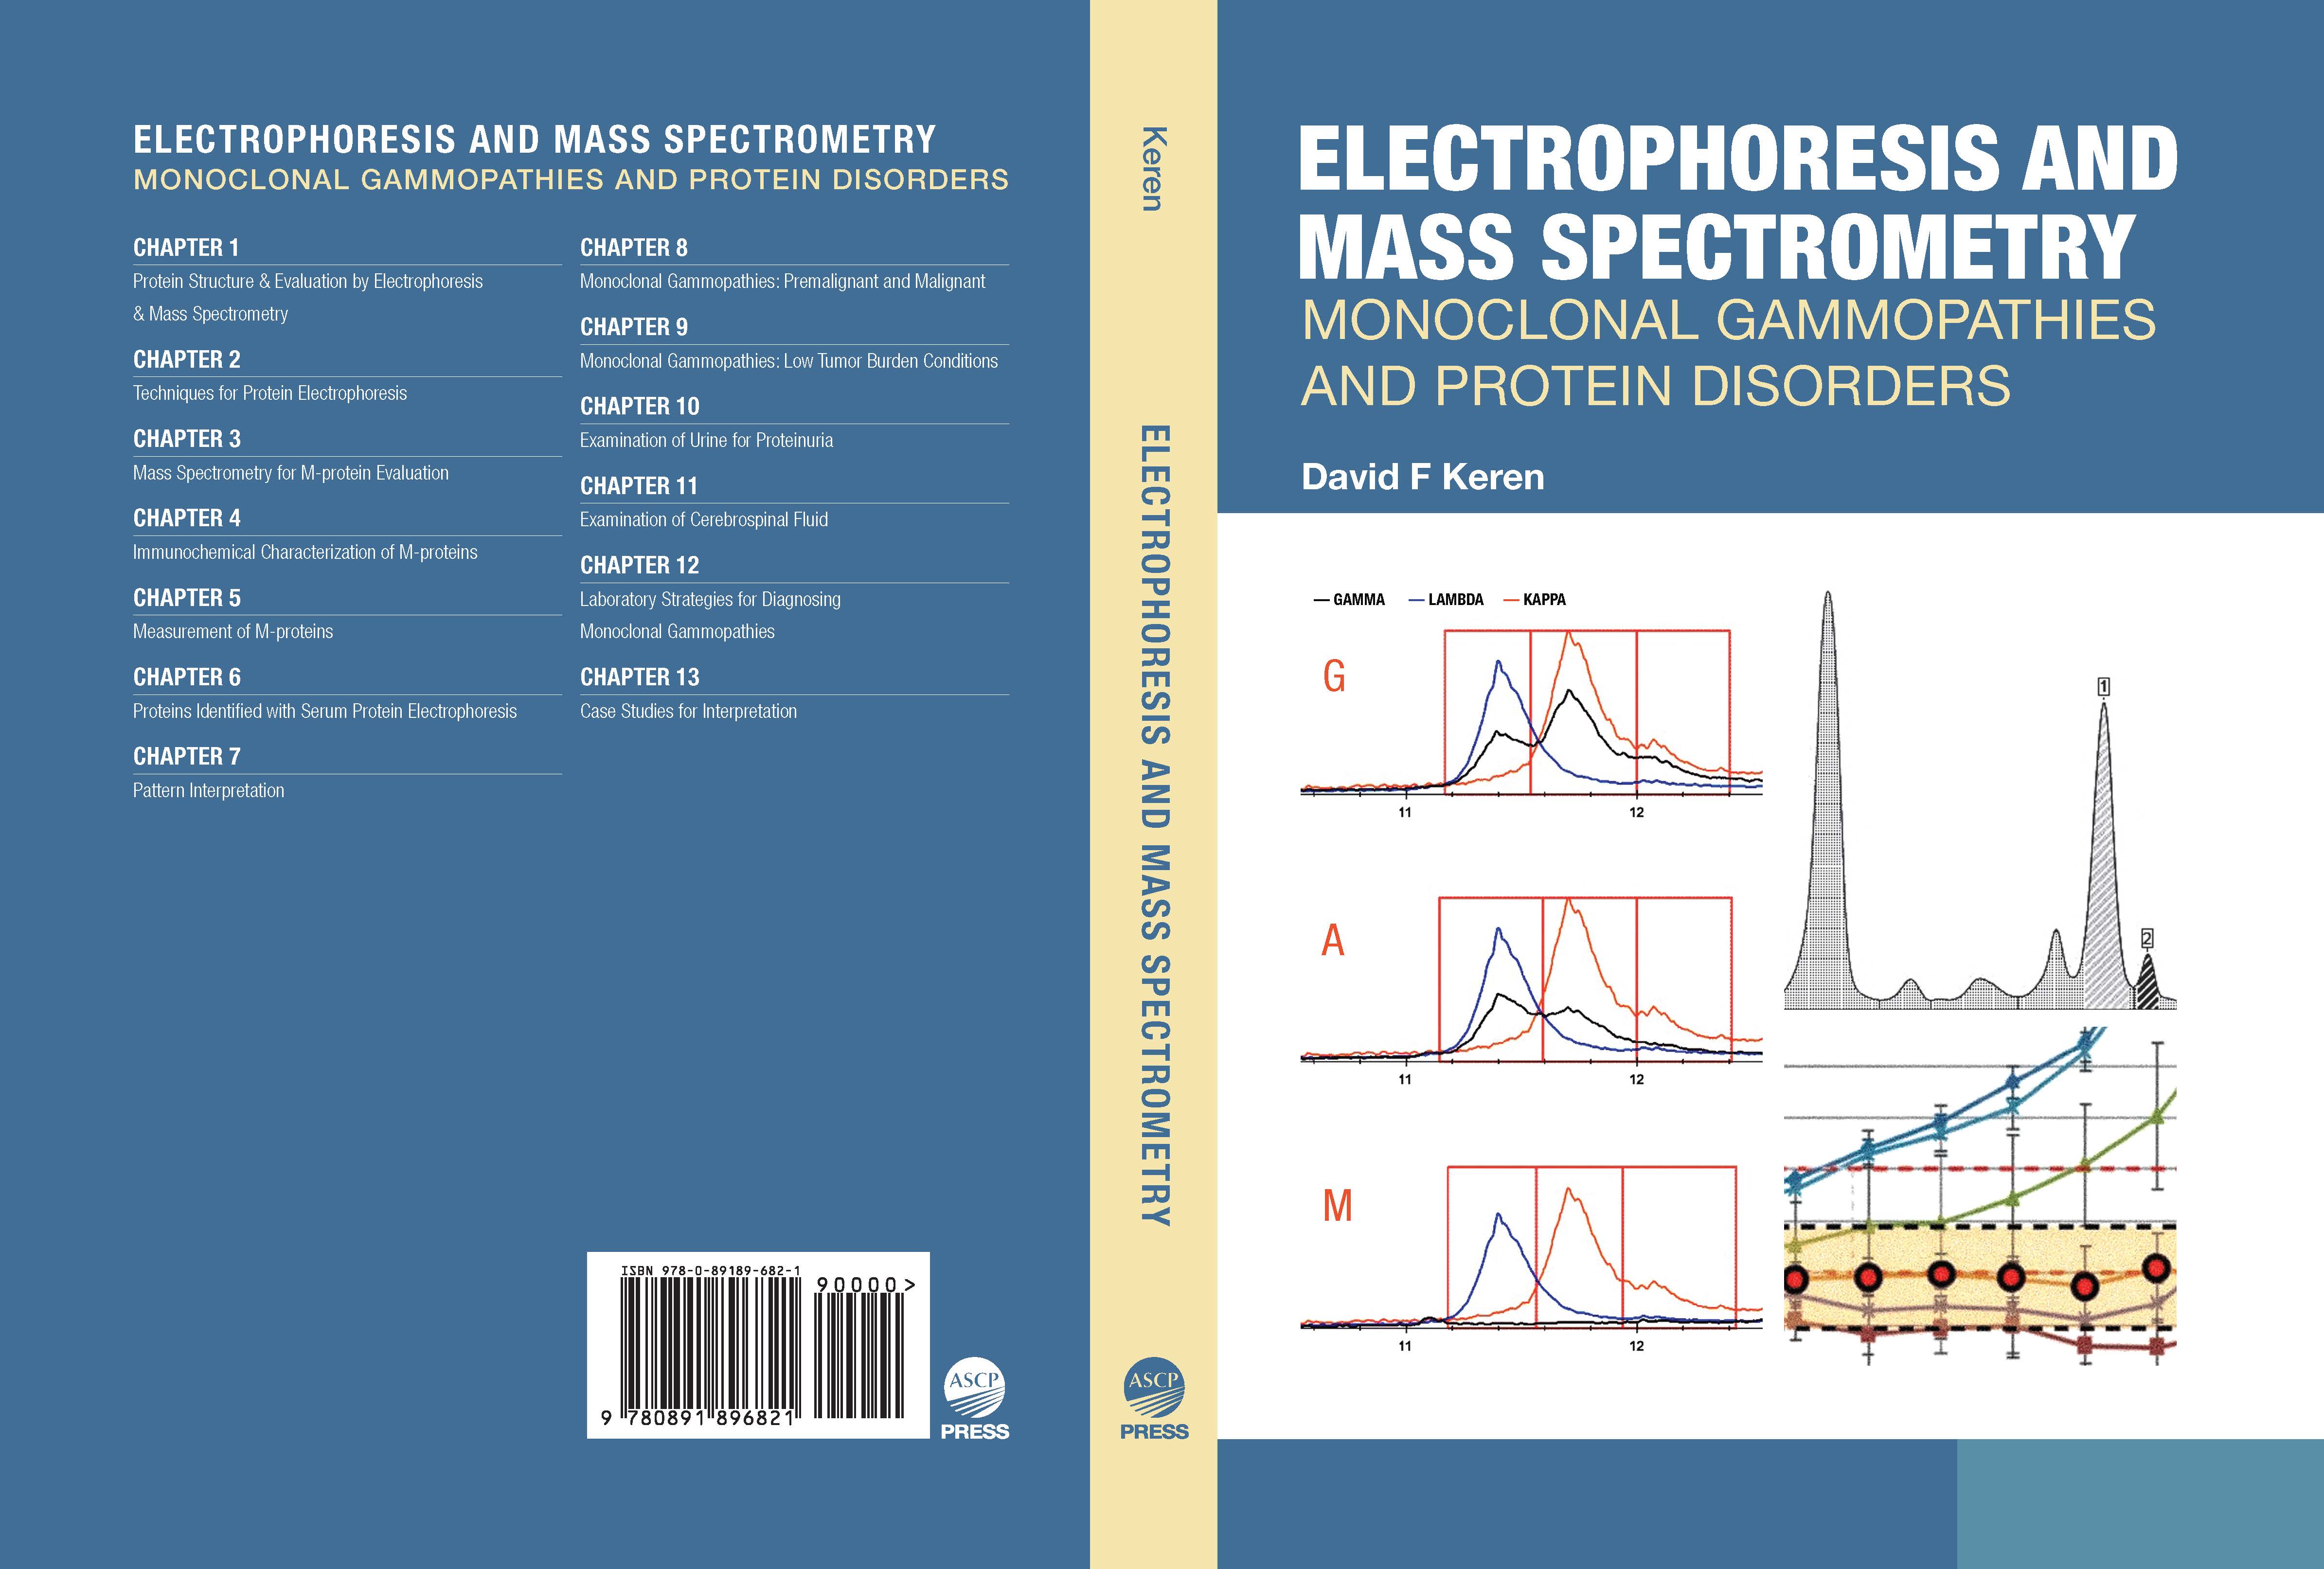 Electrophoresis and Mass Spectrometry